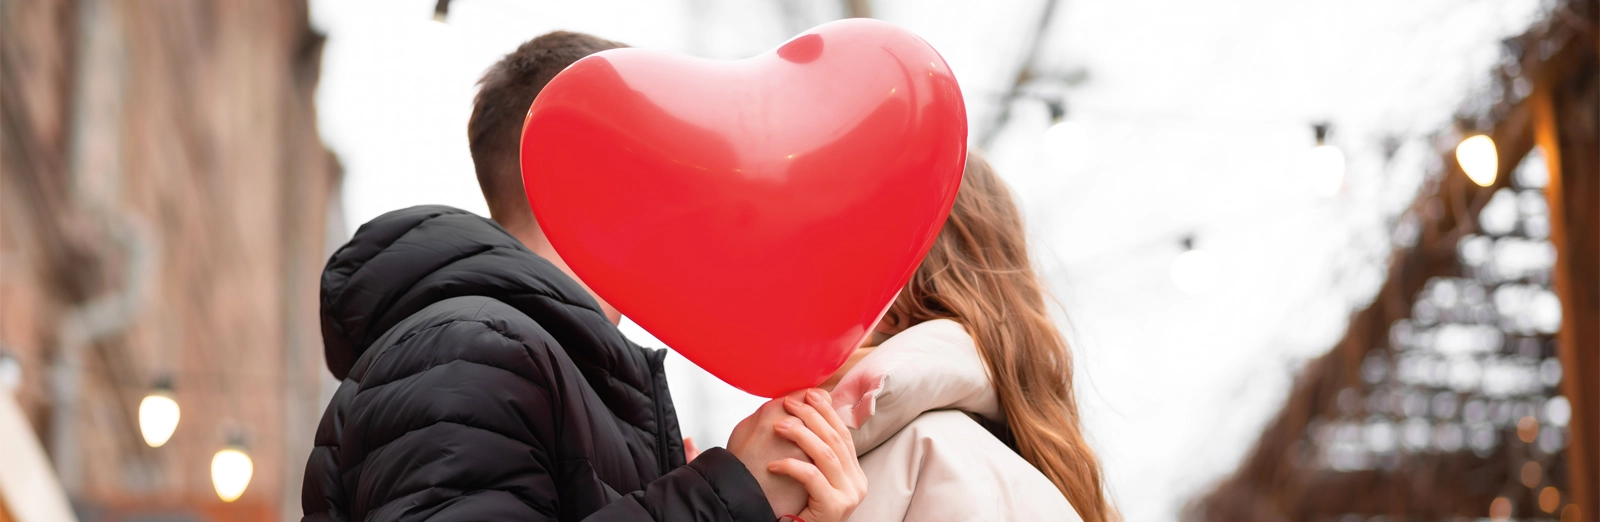 couple-with-heart-shaped-balloon-1600x5221.webp